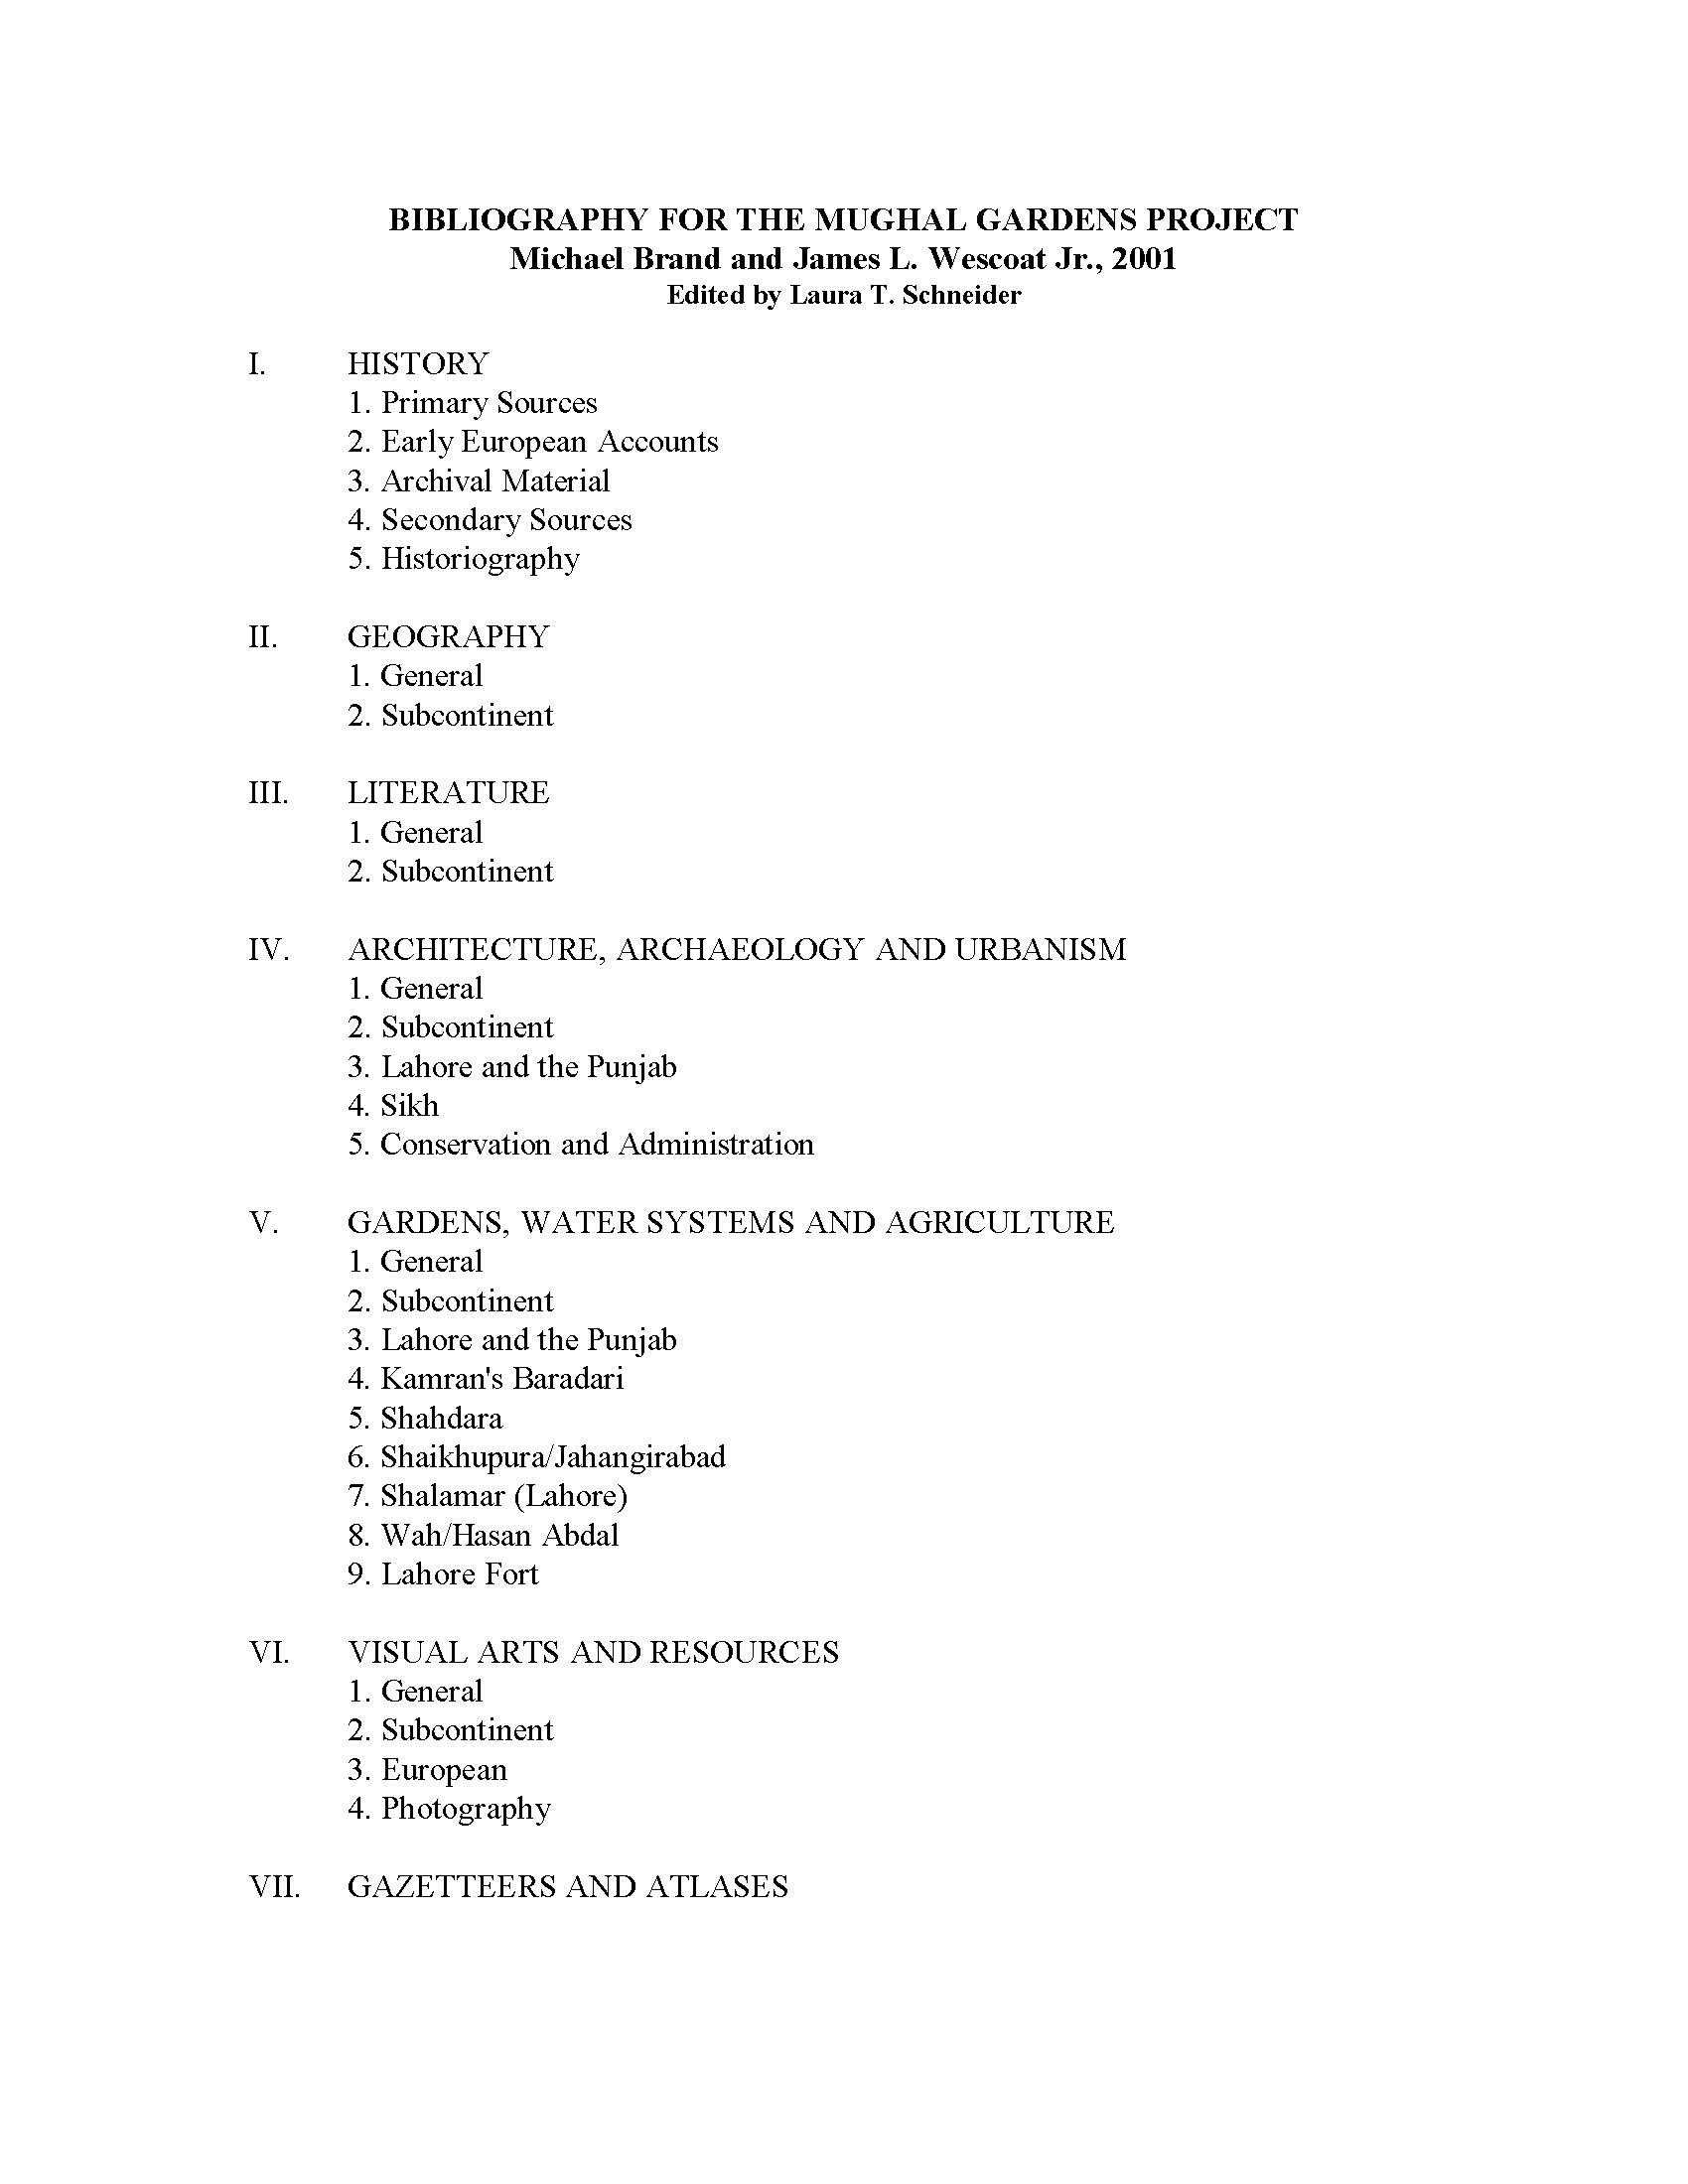 Bibliography for the Mughal Gardens Project (Up to 2001)